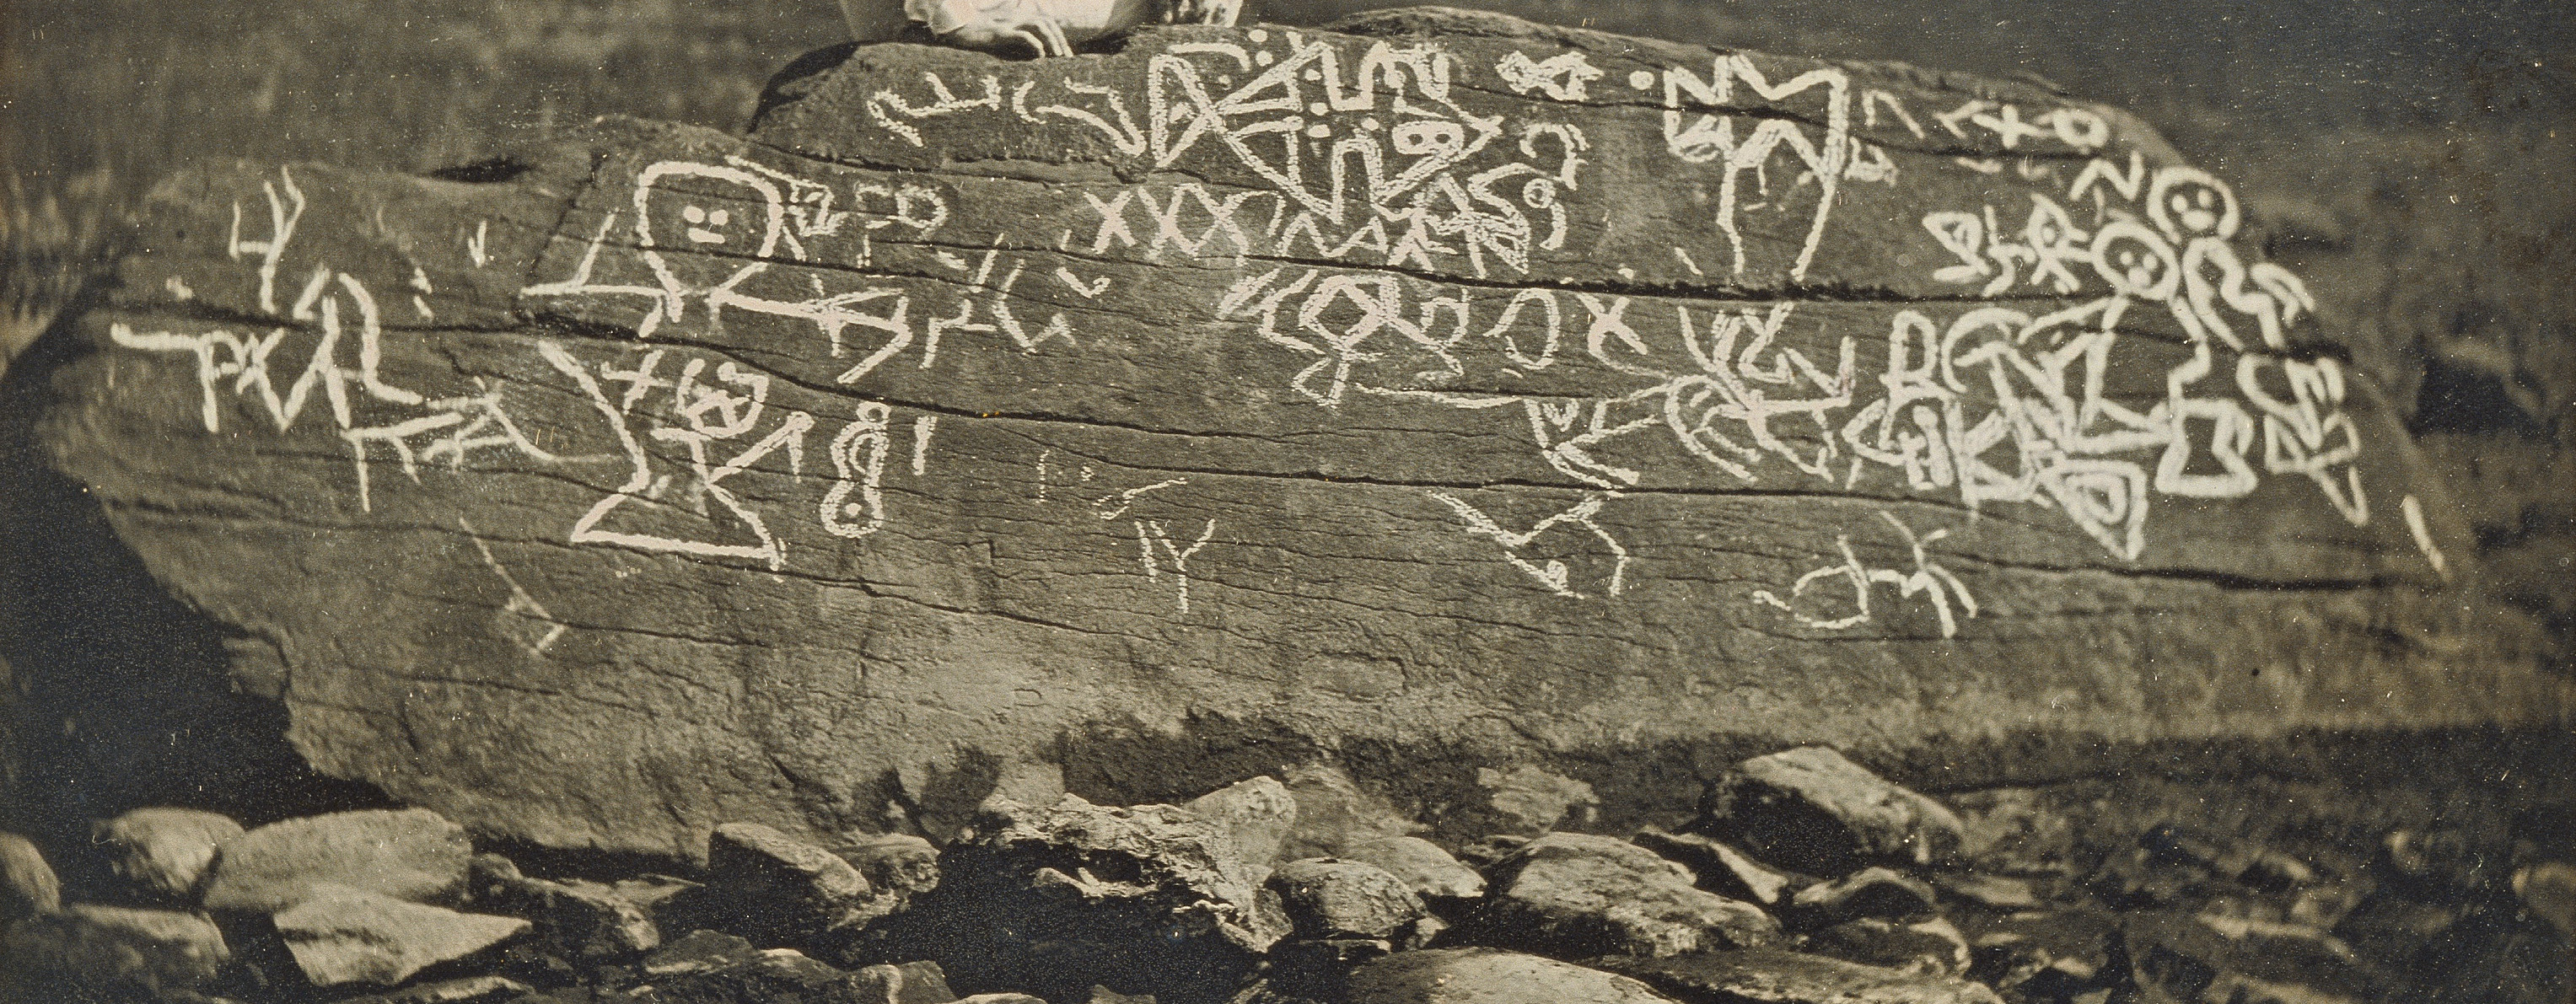 Crop from Seth Eastman at Dighton Rock by Horatio B. King, 1853.  Petroglyphs are traced with chalk.